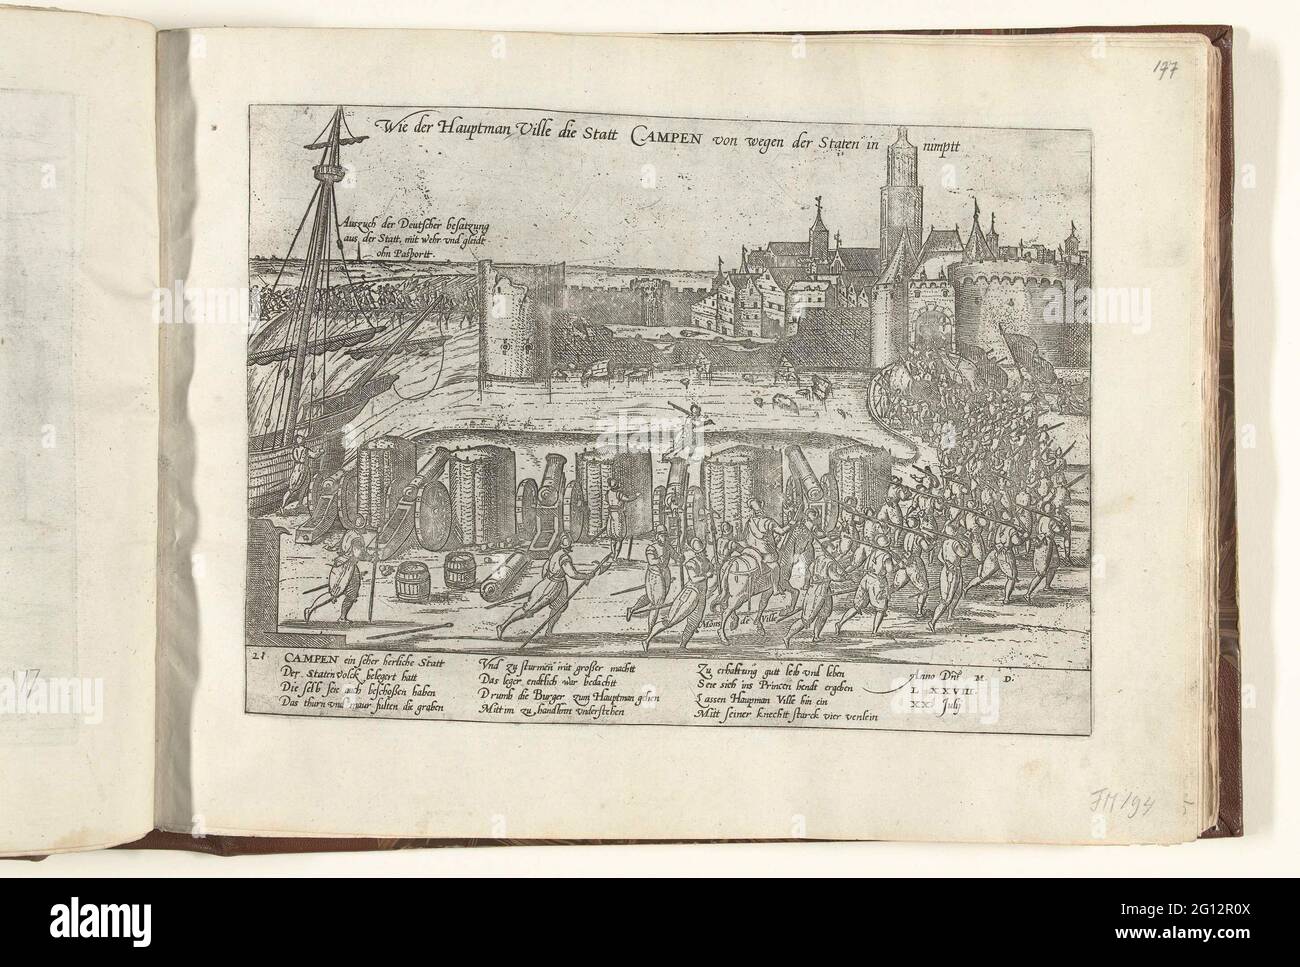 Conquest of camps, 1578; WHO Der Hauptman Ville that Statt Campen von says in states in the states; Series 8: Dutch events, 1577-1583. Ingestion of camps after siege through state troops, July 20, 1578. In the background, the German garrison leaves from the city. With caption of 12 lines in German. Numbered: 21. Stock Photo